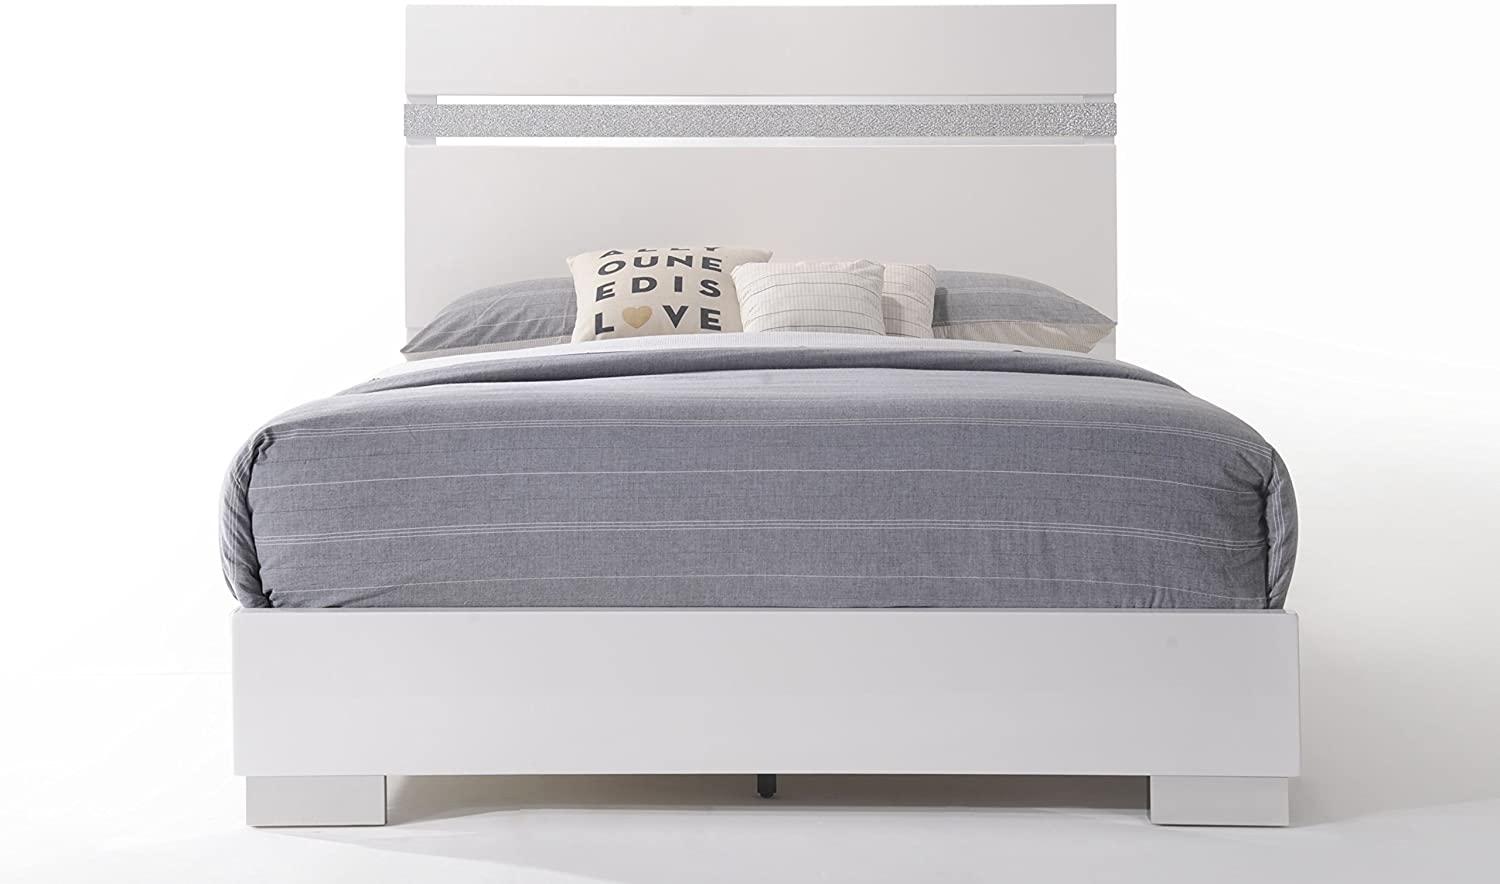 

    
White High Gloss Finish Queen Bed Contemporary Naima II-26770Q Acme
